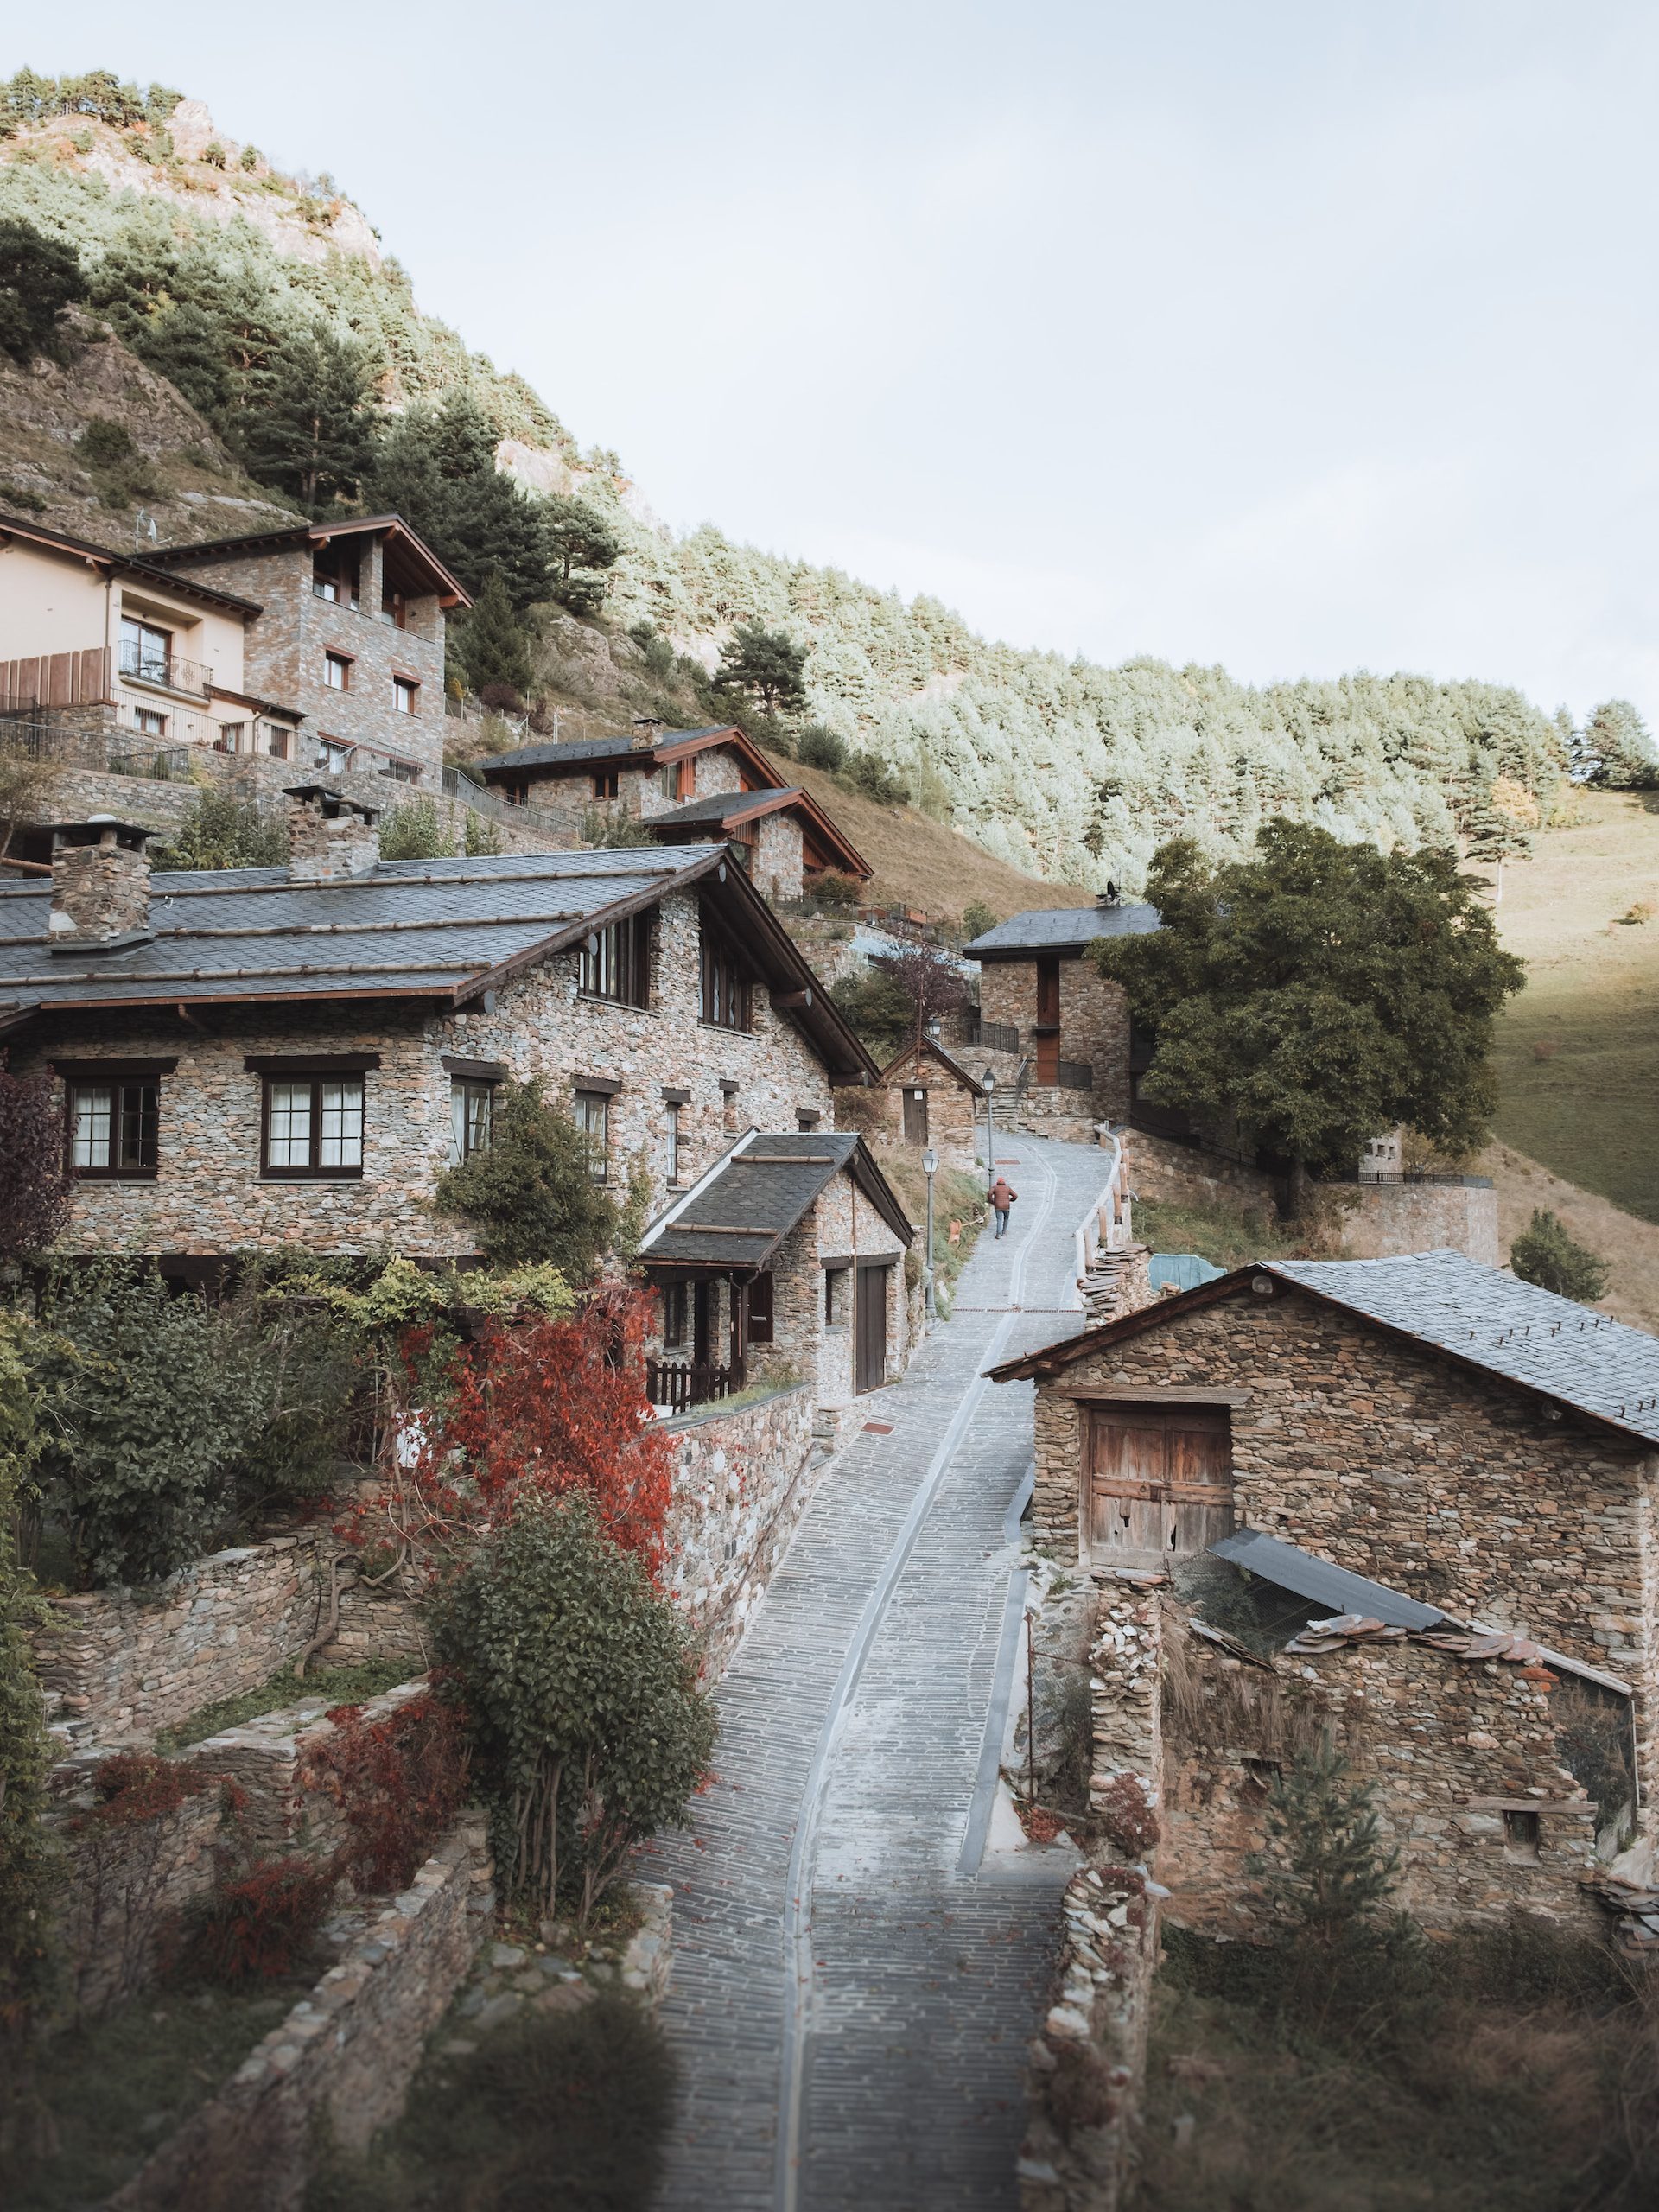 Andorra Travel Guide: Top Things to Do in Andorra - At Lifestyle Crossroads